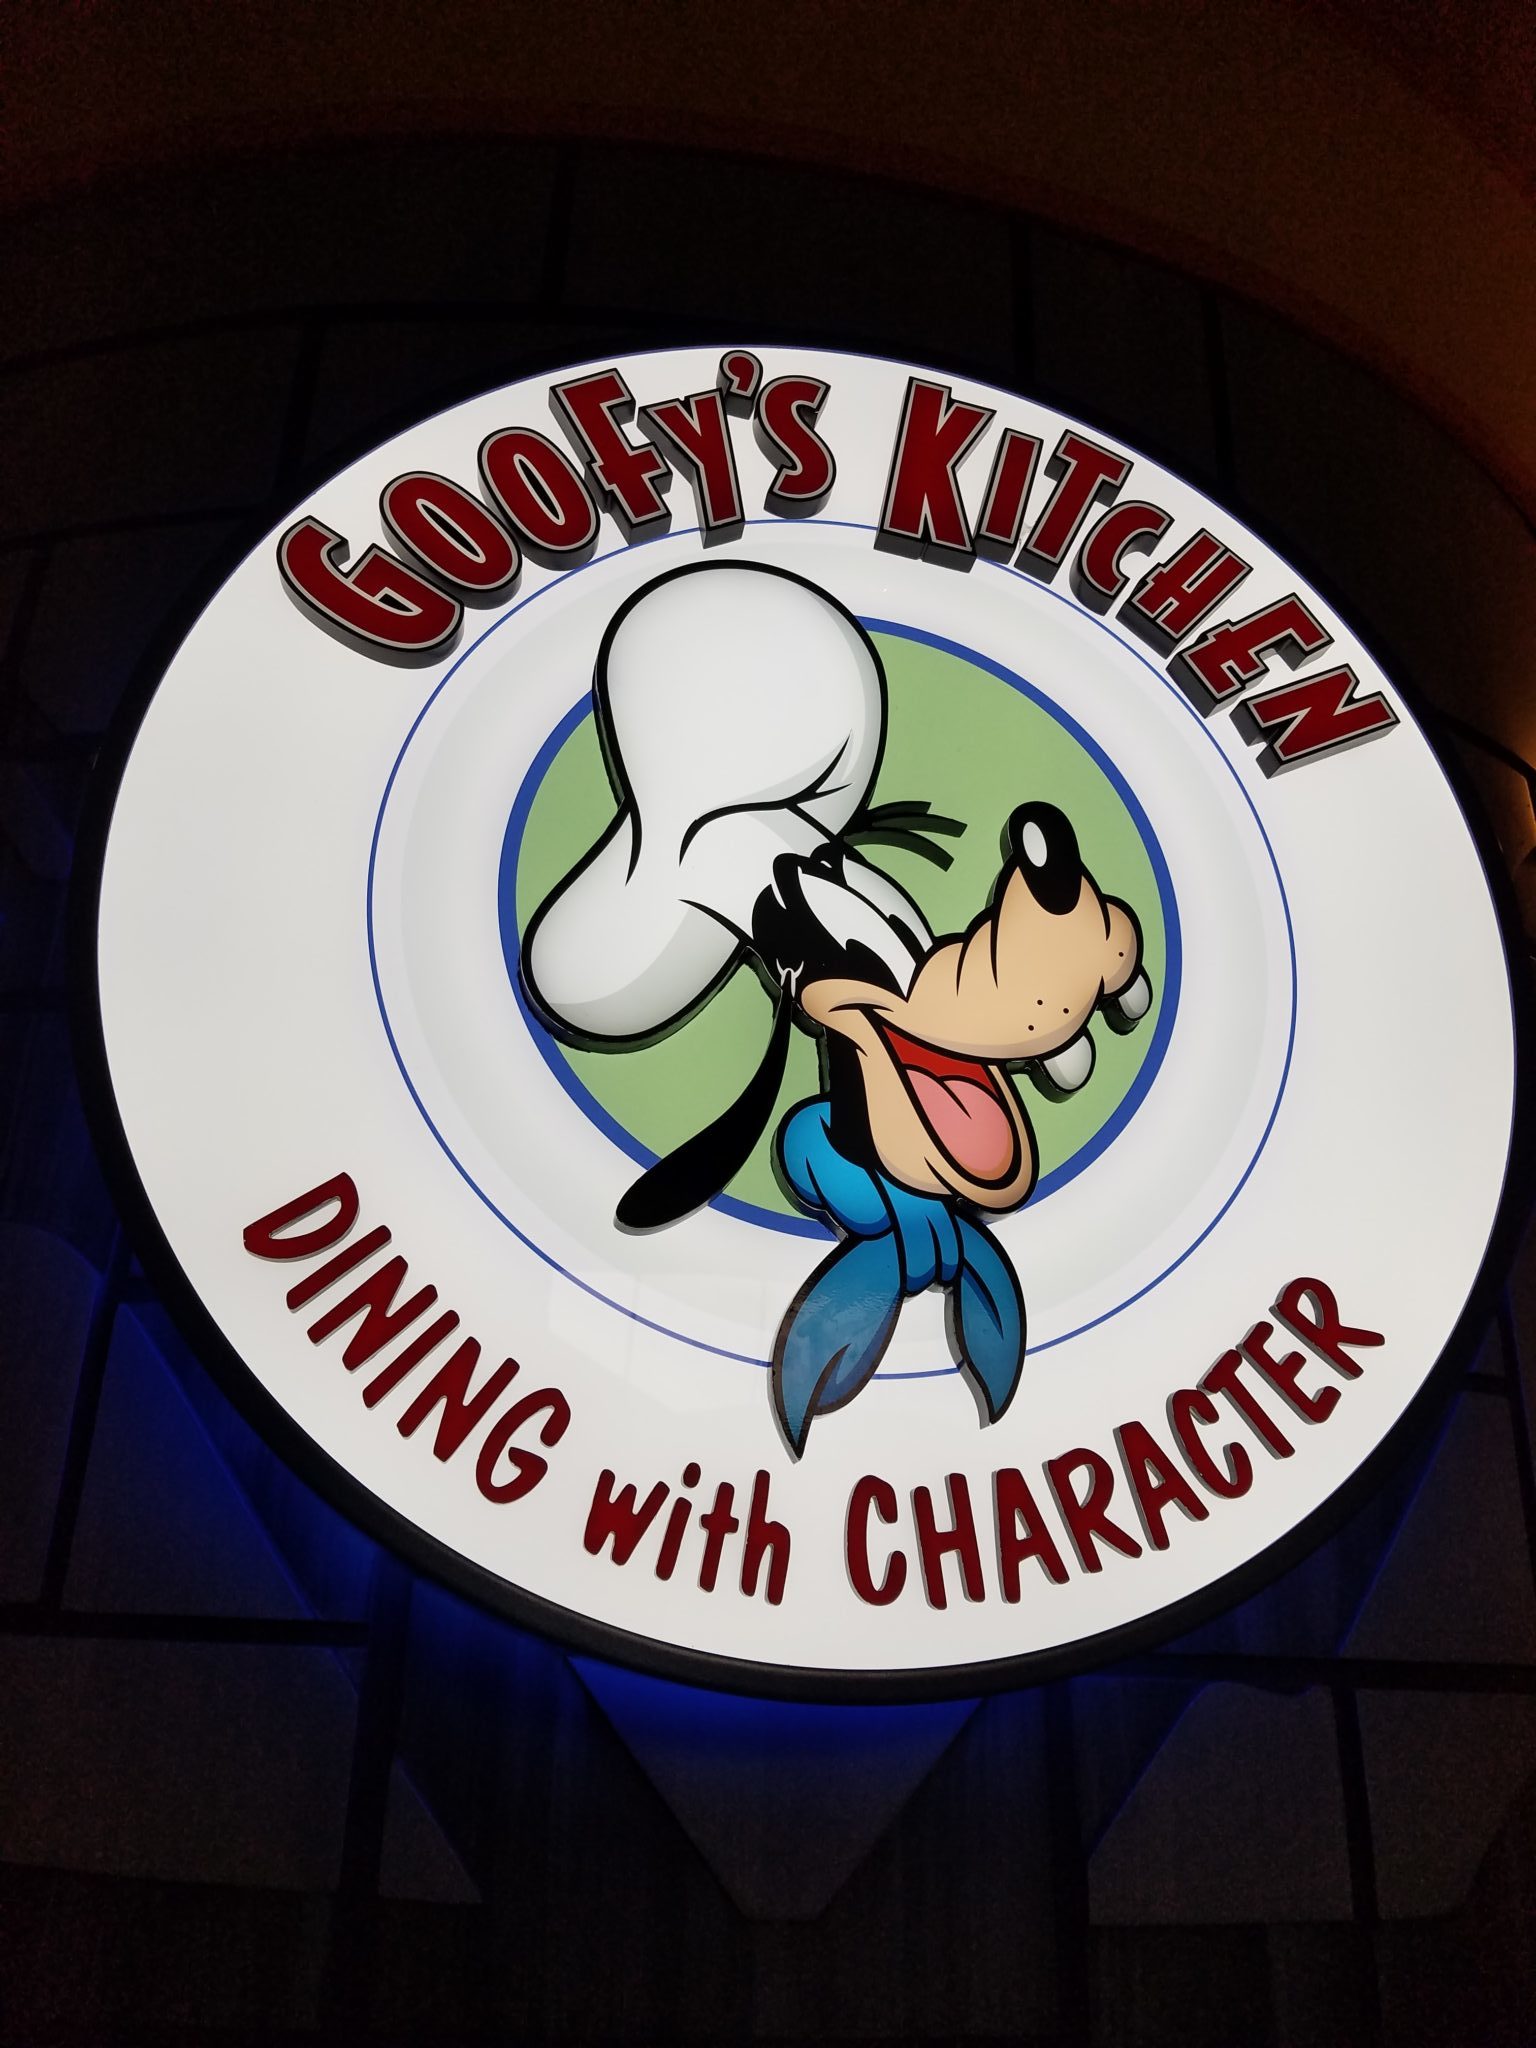 Goofy’s Kitchen Offers Abundant Food and Awesome Character Interactions